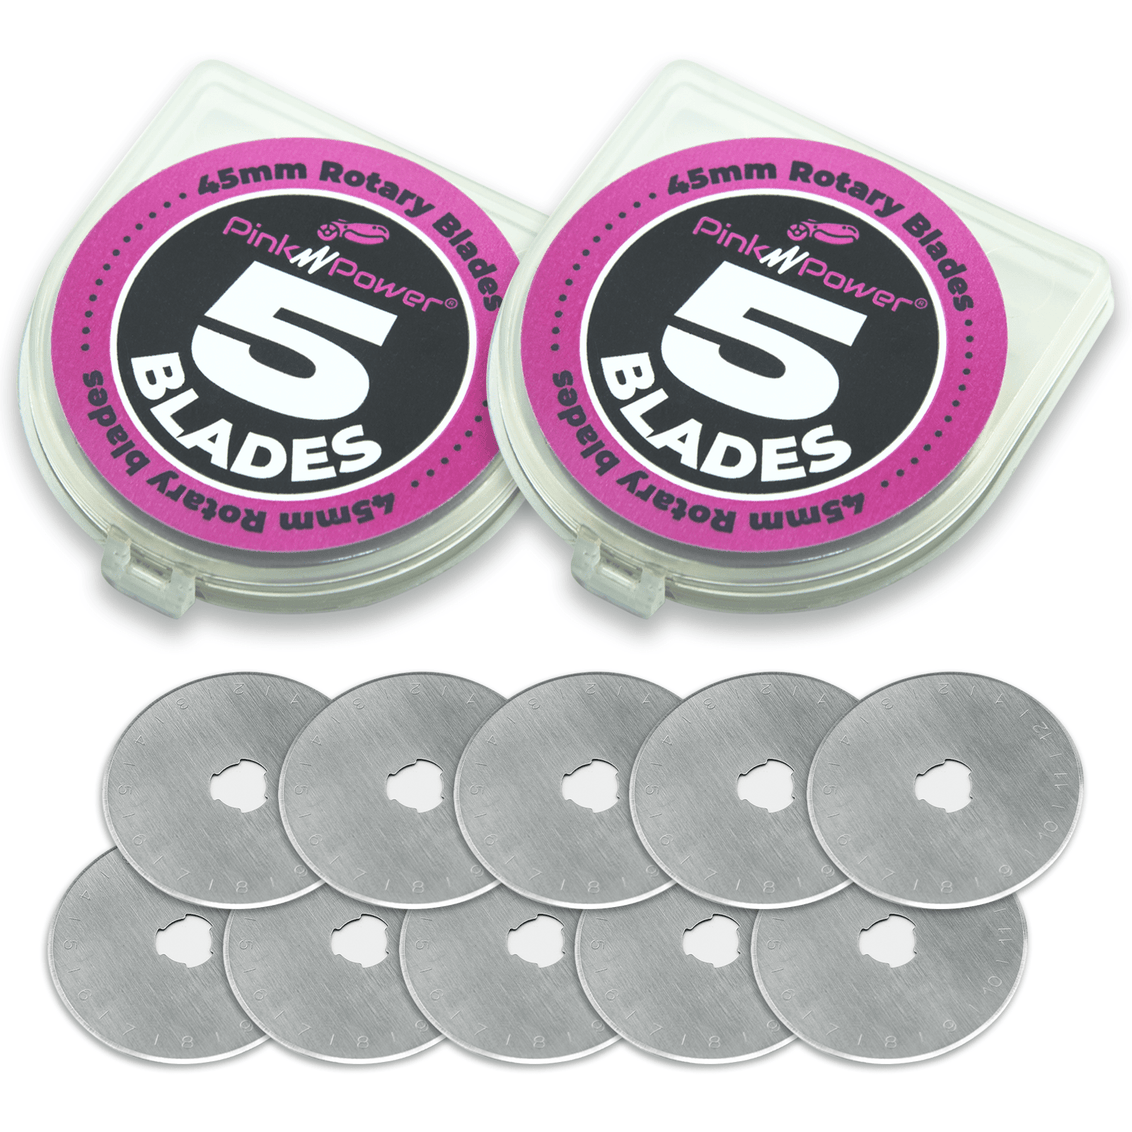 45mm Rotary Cutter Blades for Pp212 Fabric Rotary Cutter - 10 Pack